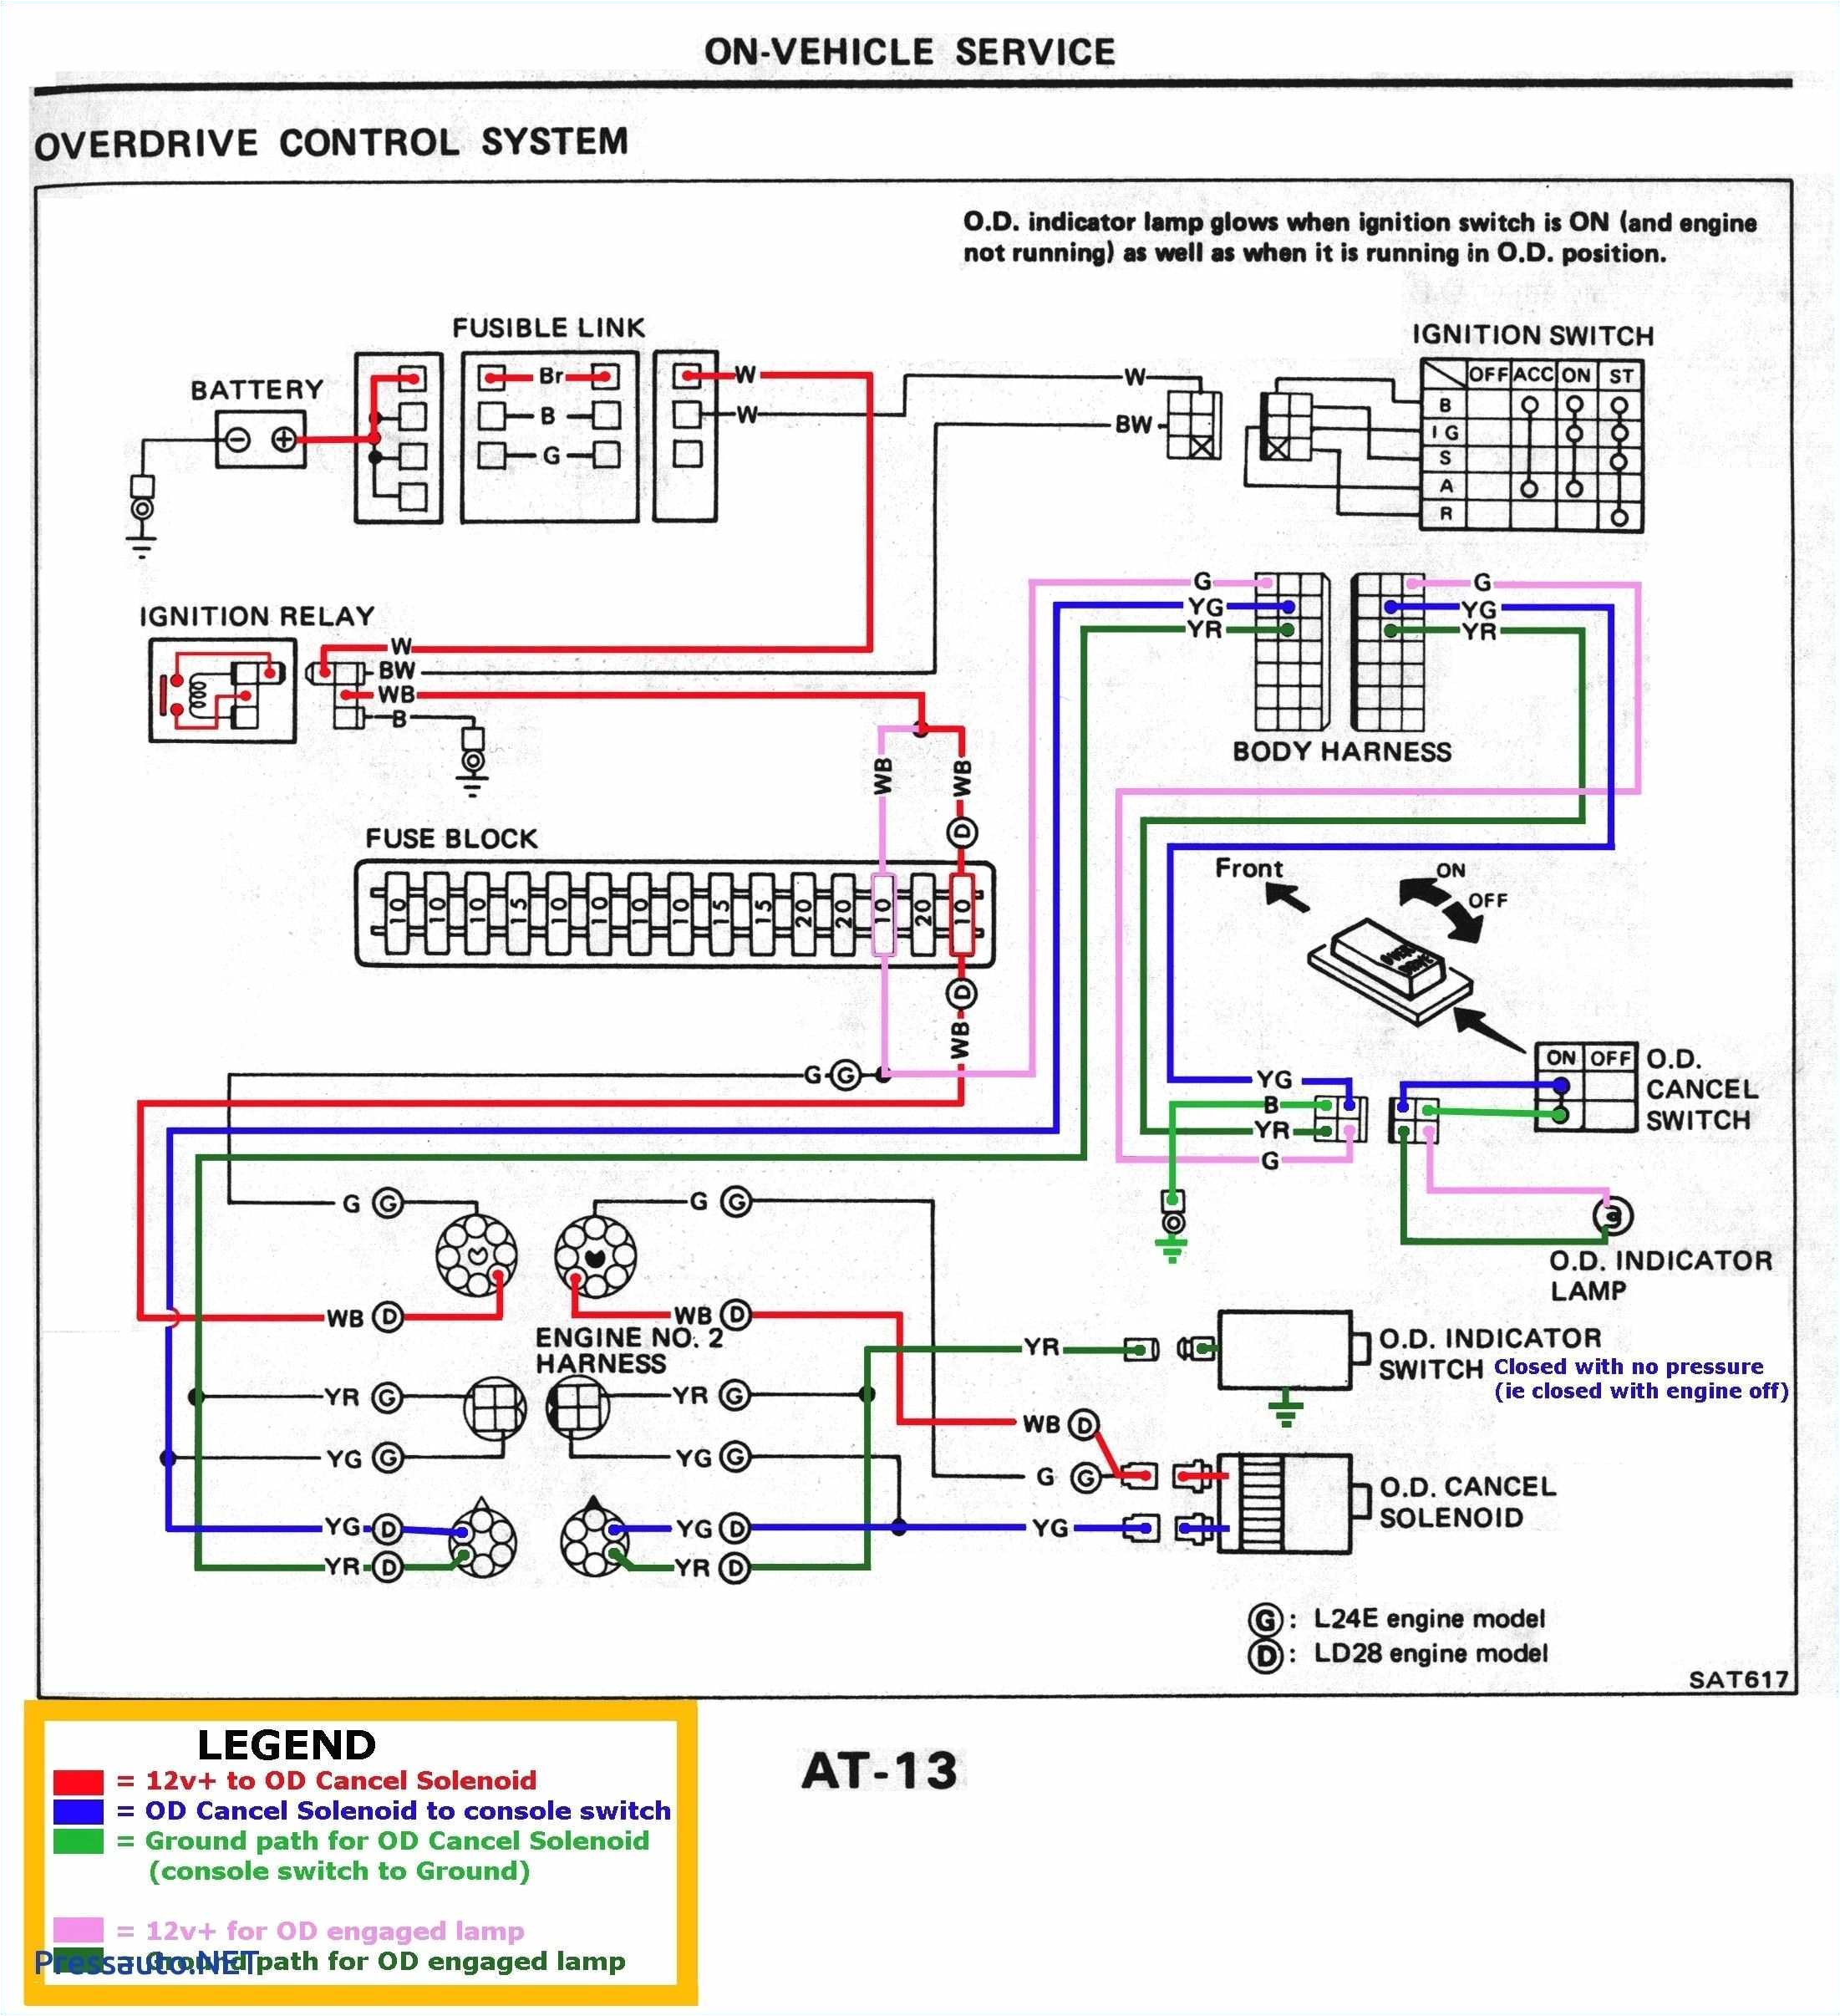 vr3 car stereo wiring harness wiring diagram paper vr3 car stereo wire harness wiring diagram paper